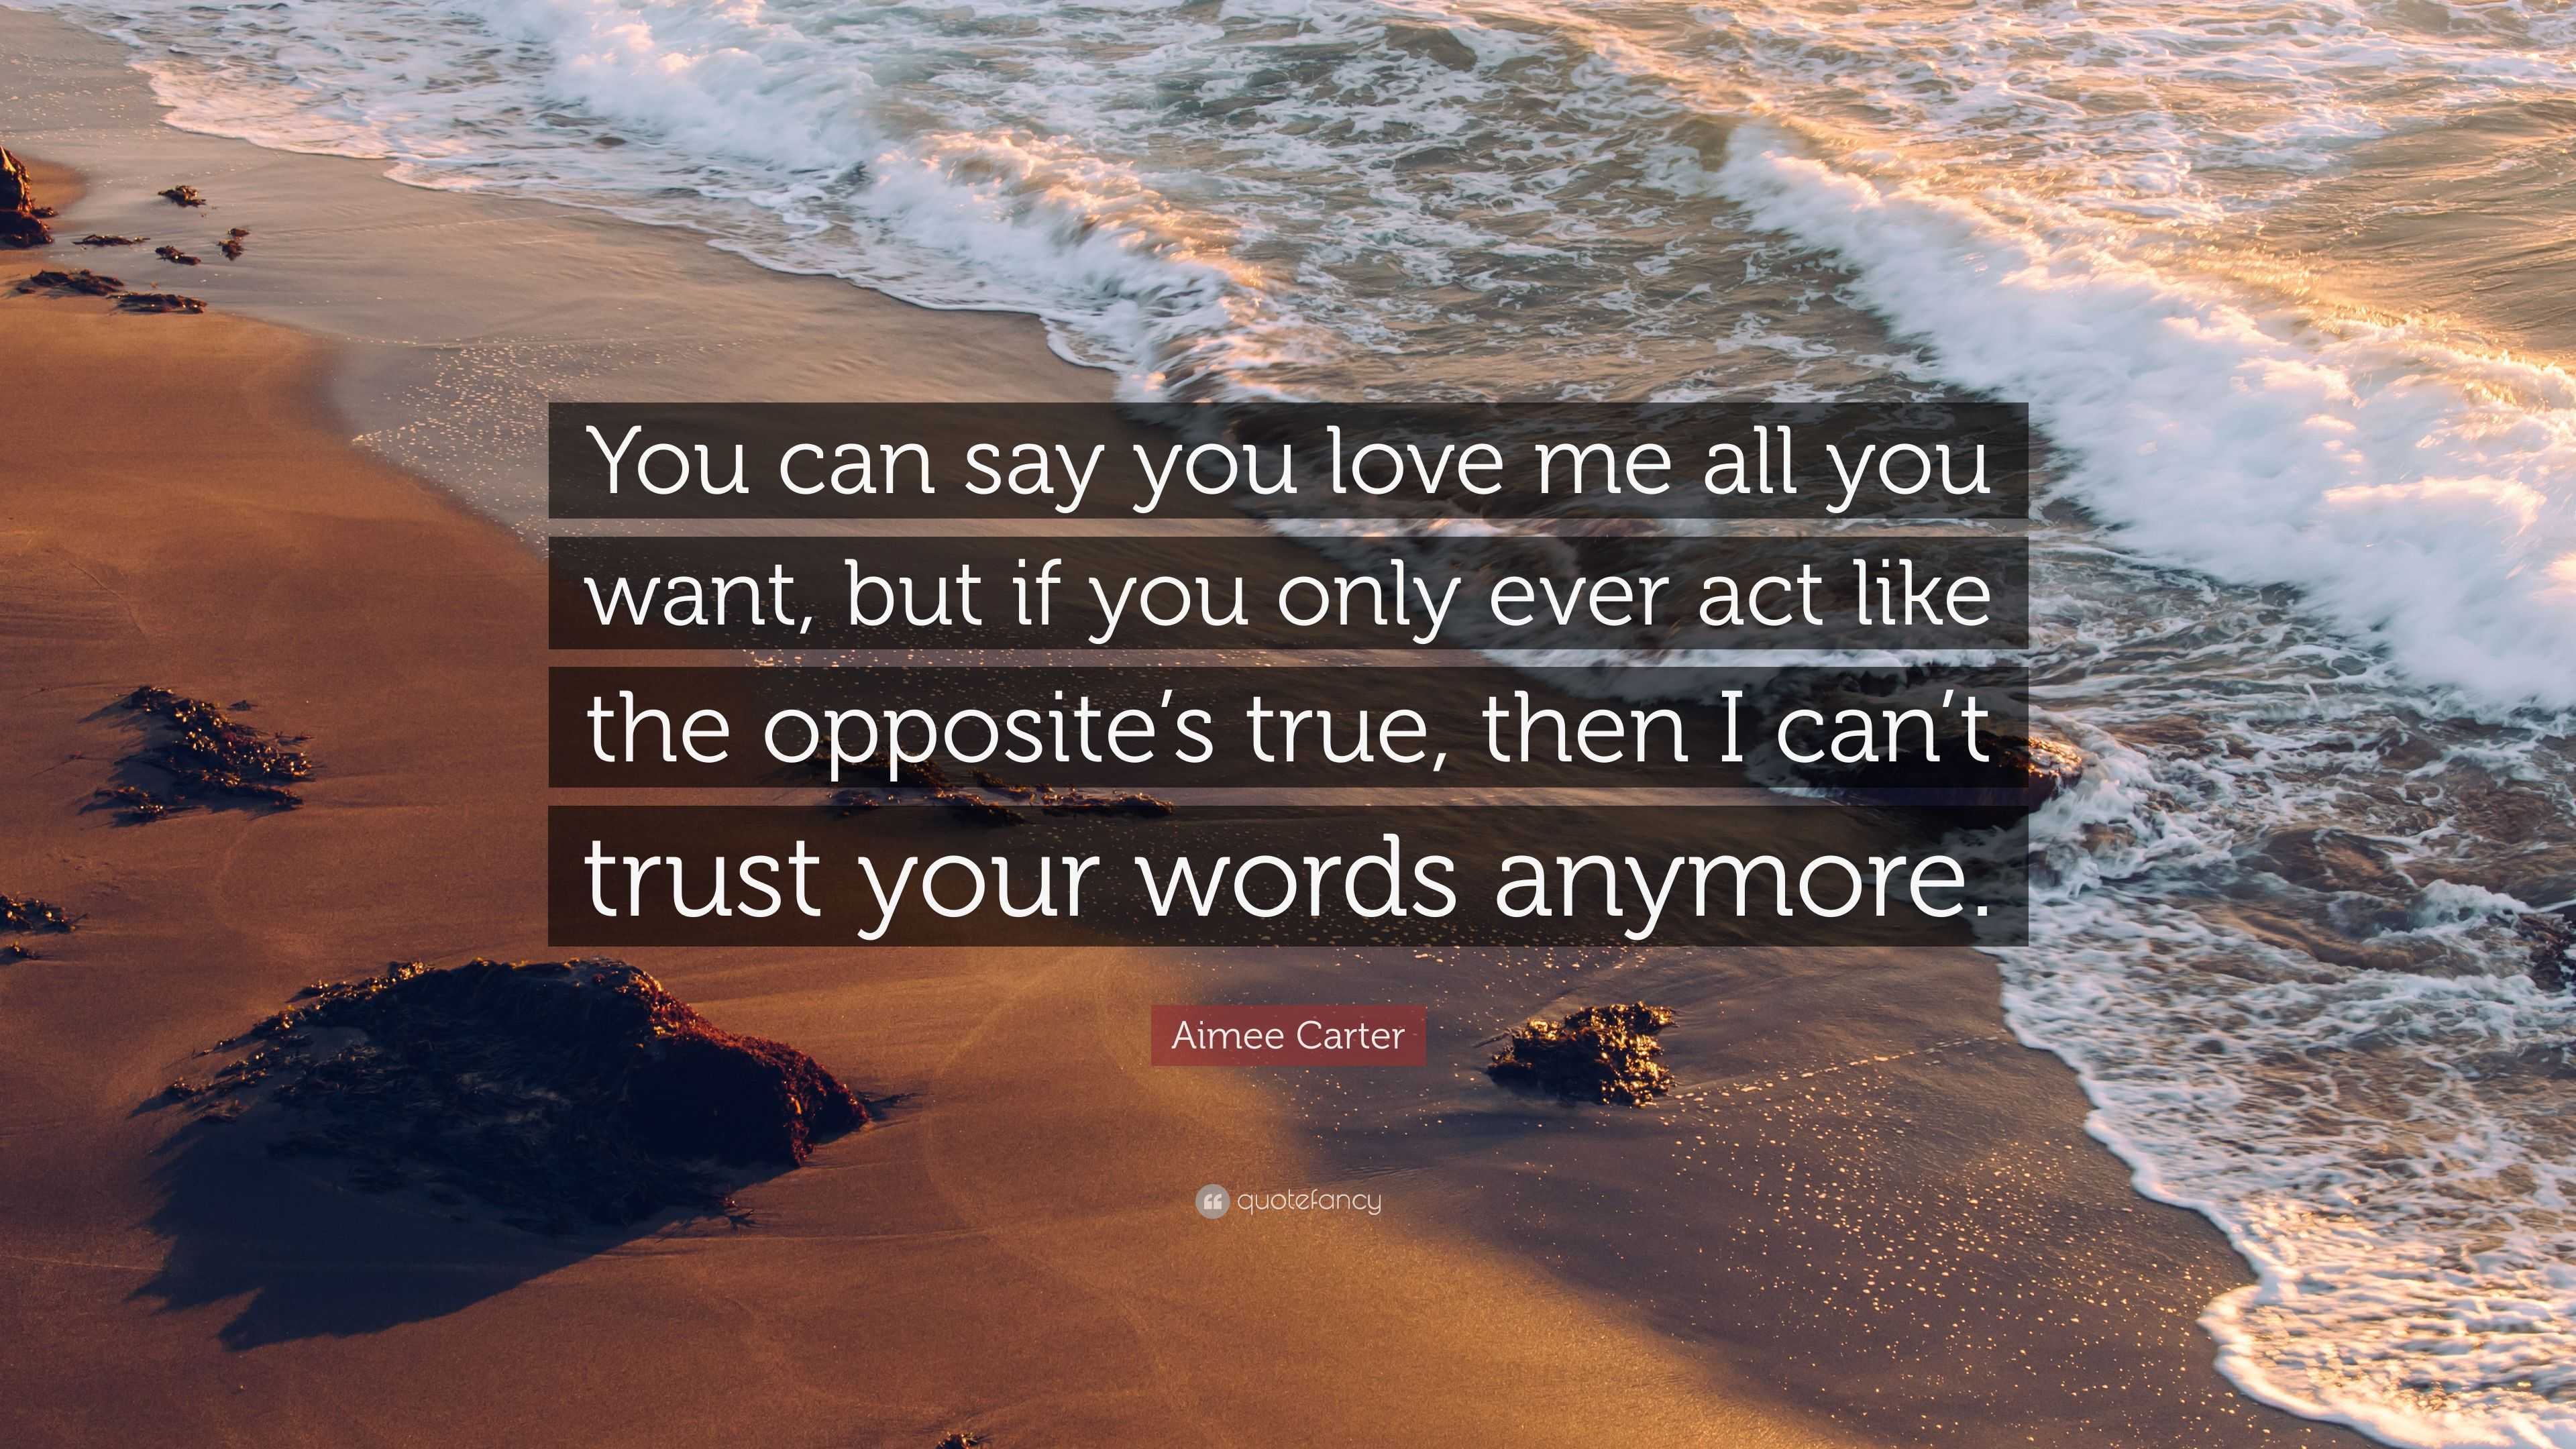 Act Like You Love Me 115 Aimee Carter Quote: “You can say you love me all you want, but if you only  ever act like the opposite's true, then I can't trust your words a...”